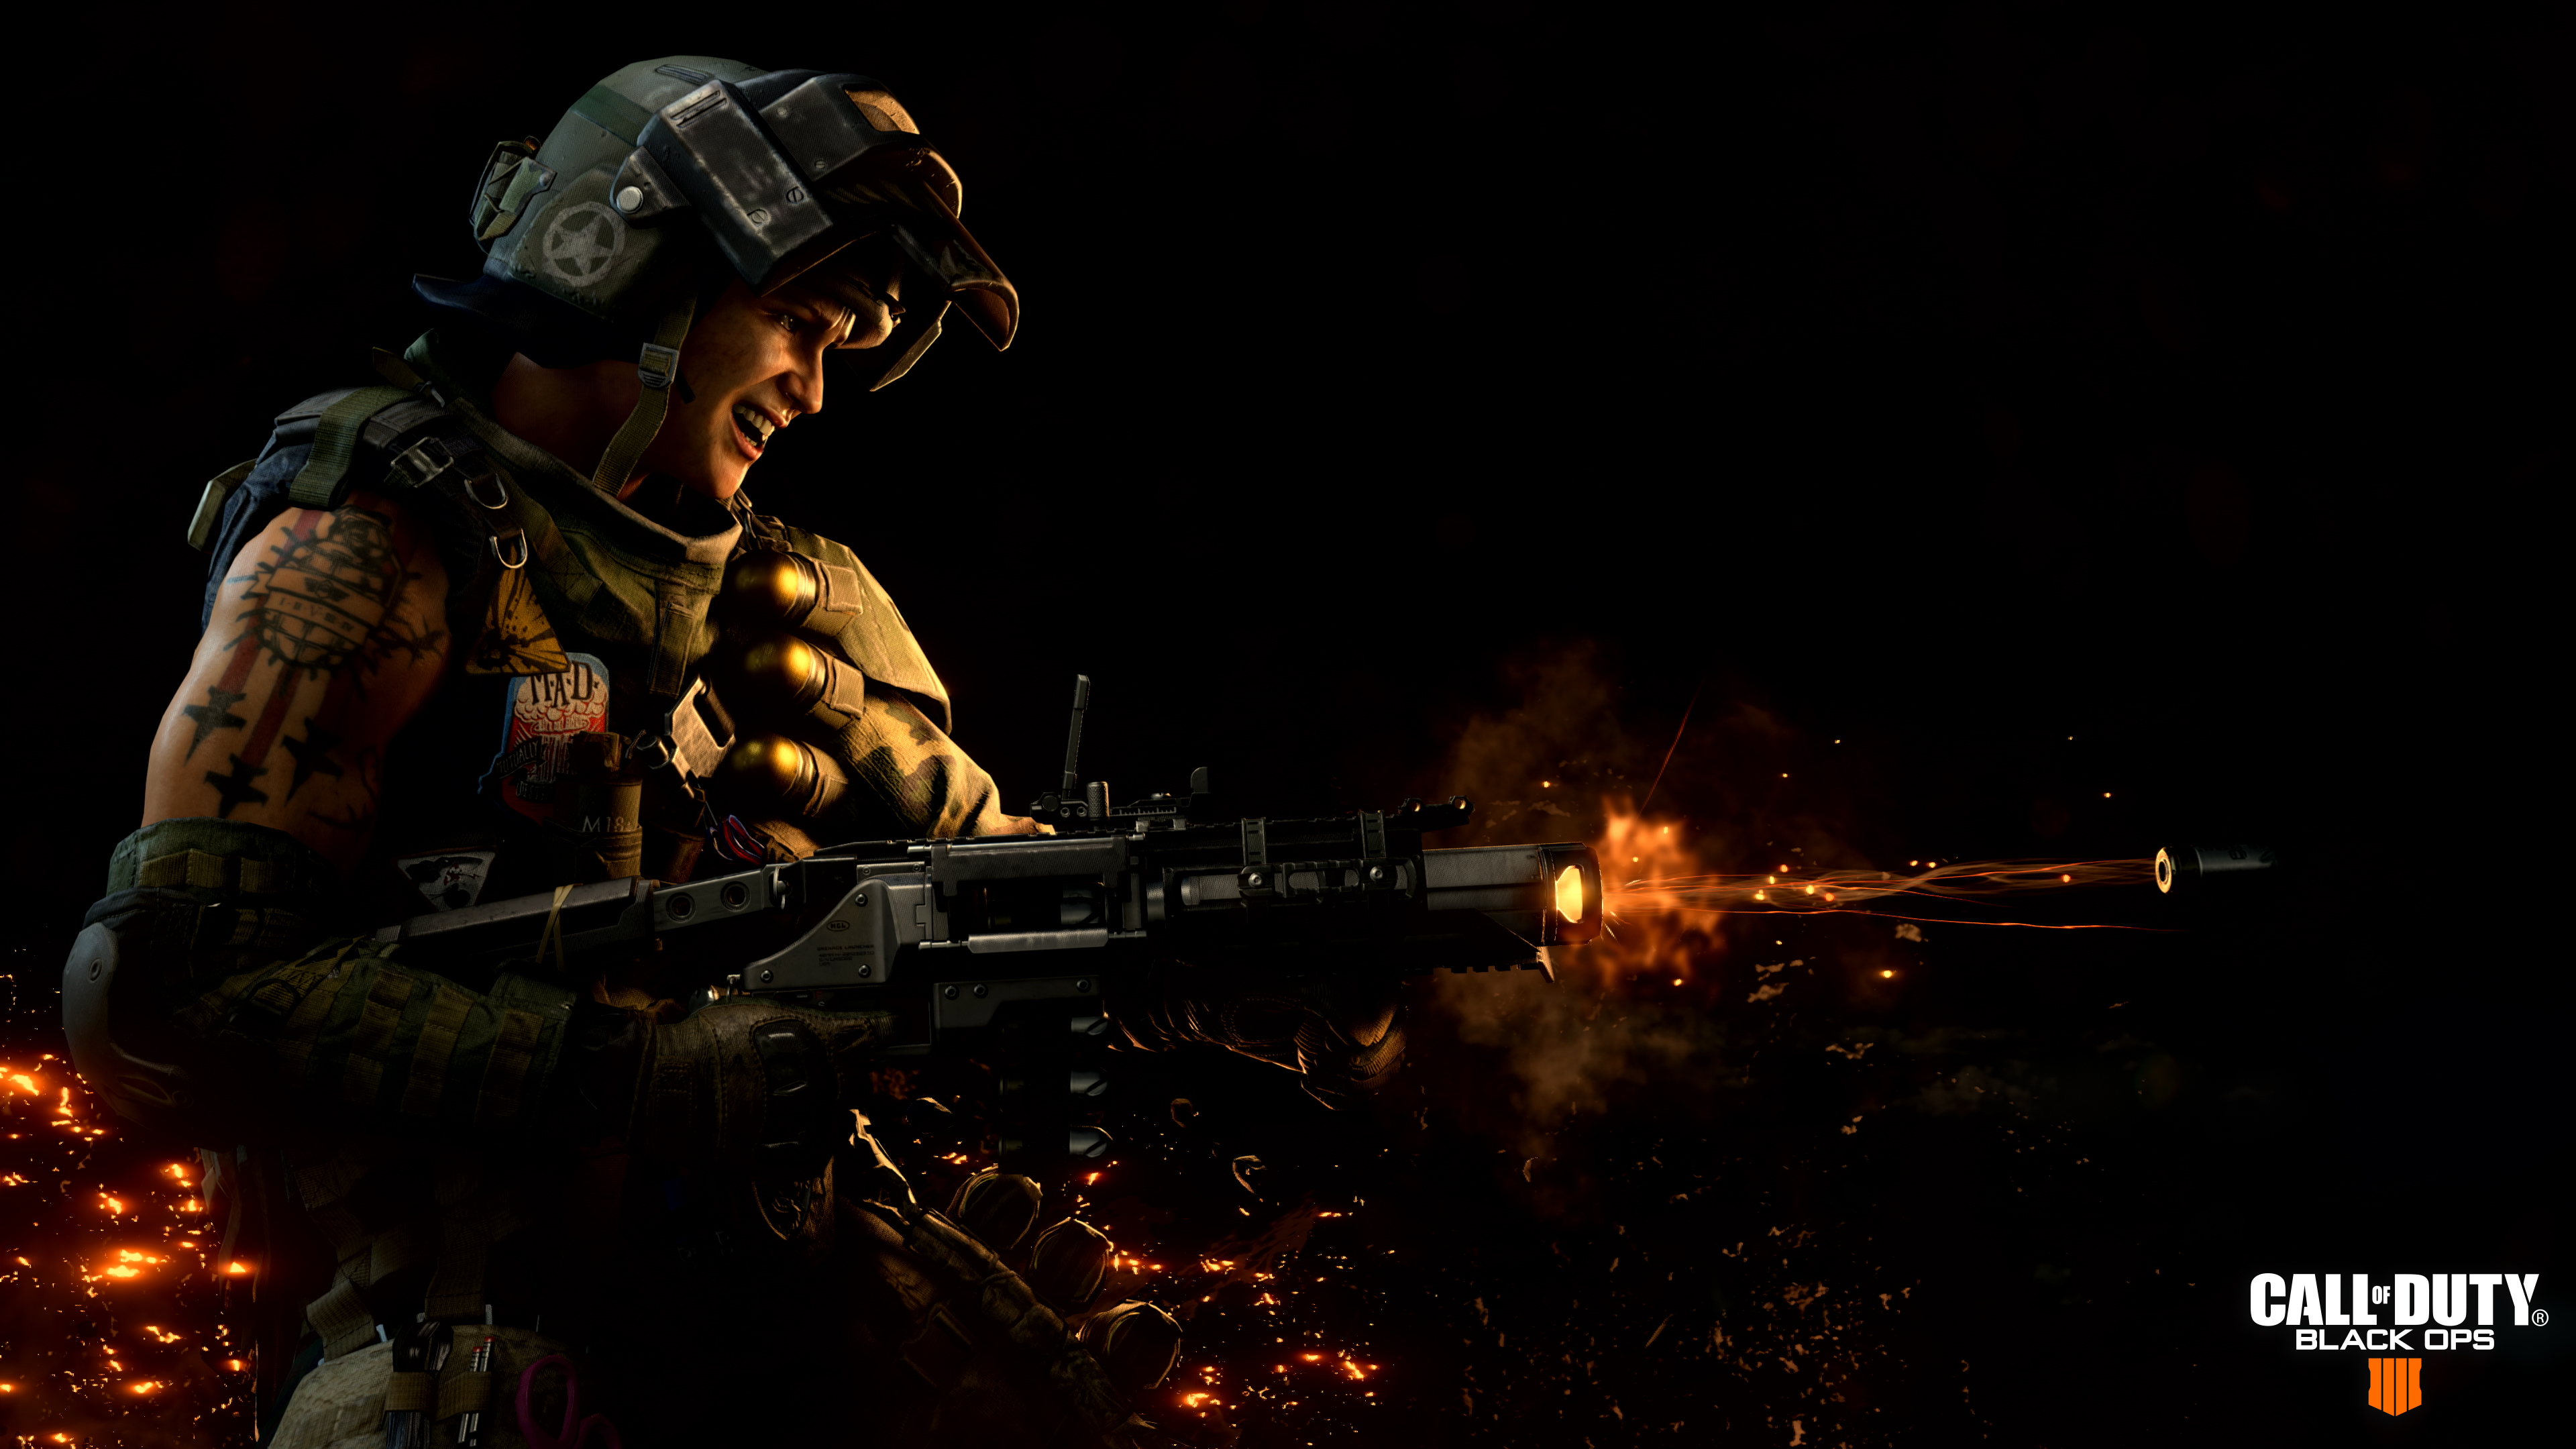 Call Of Duty Black Ops 4 4k, HD Games, 4k Wallpapers, Images